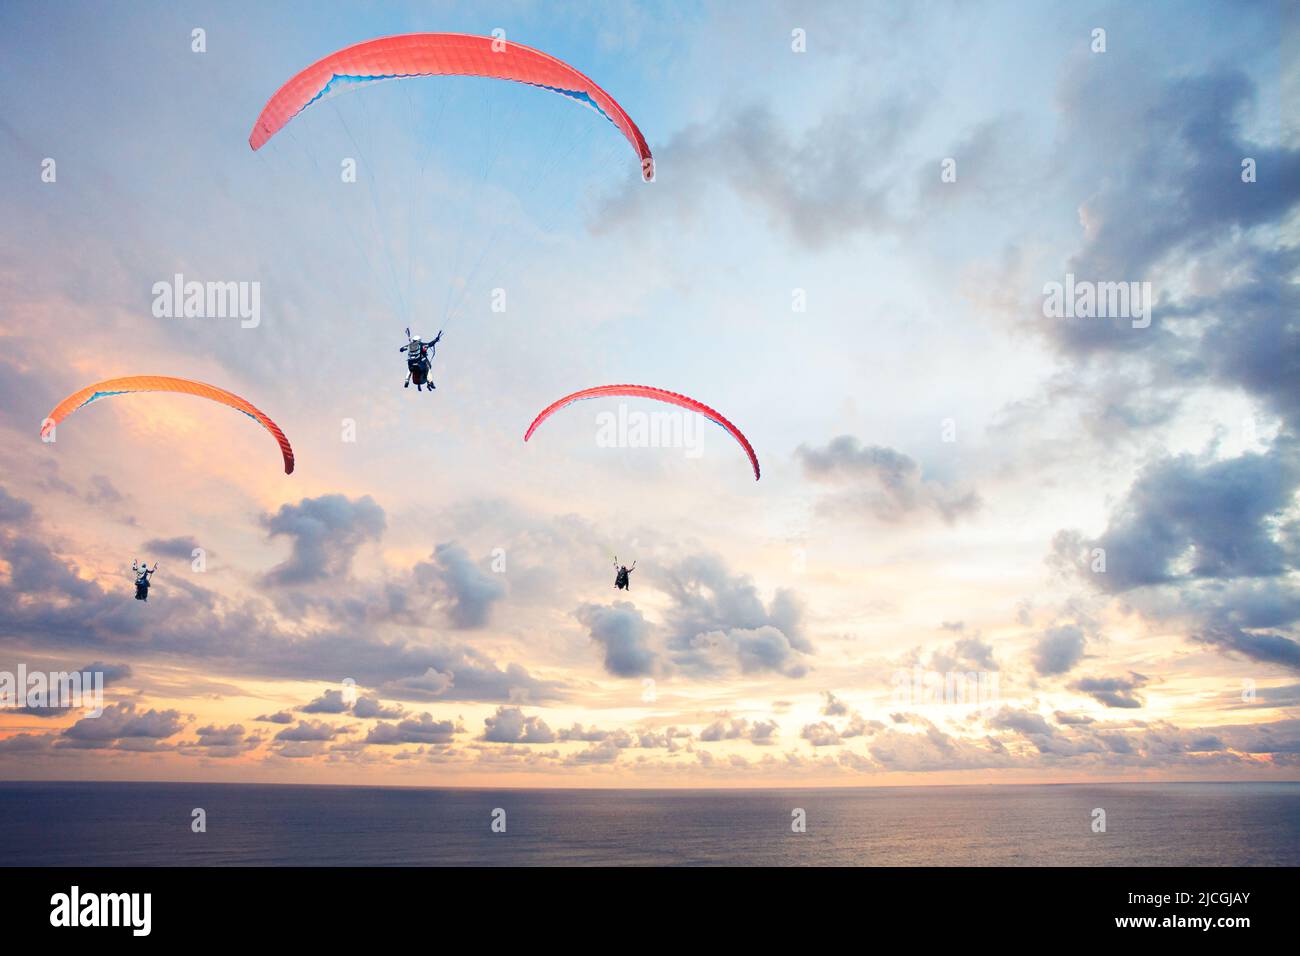 Three paragliders against the sky over with beautiful sunset Stock Photo